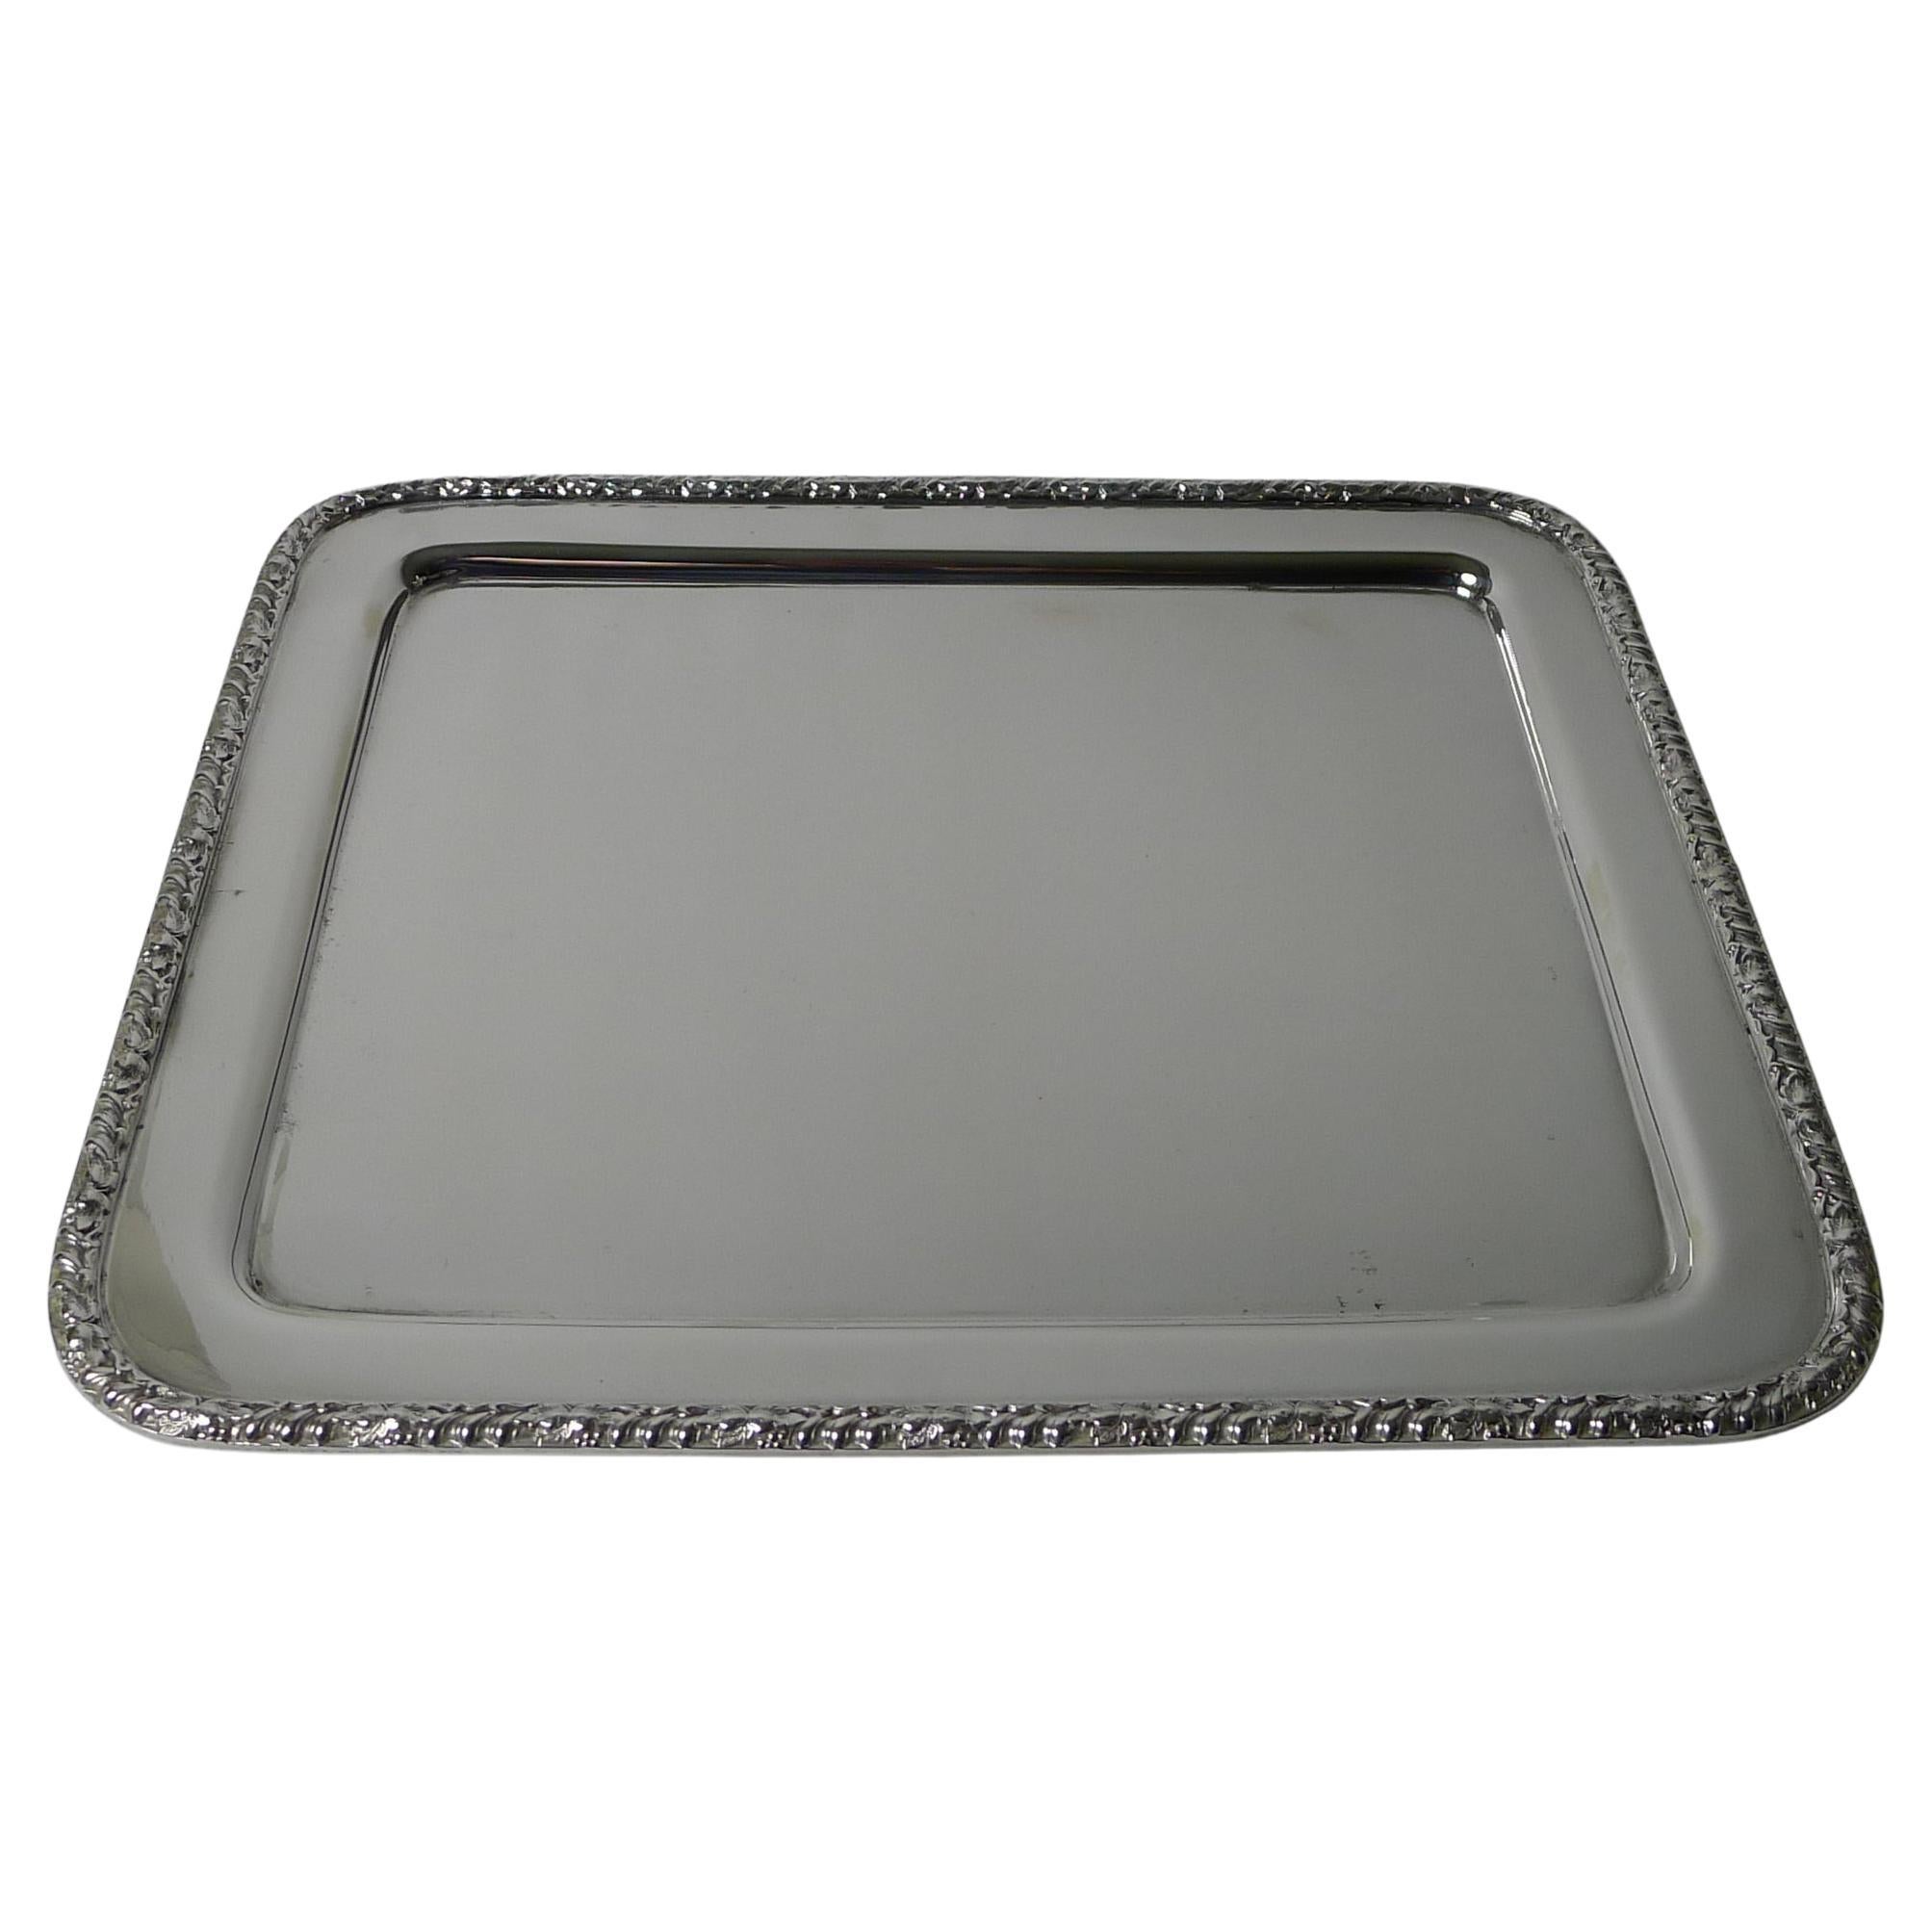 Elegant English Silver Plated Cocktail Tray by Barker Brothers c.1900